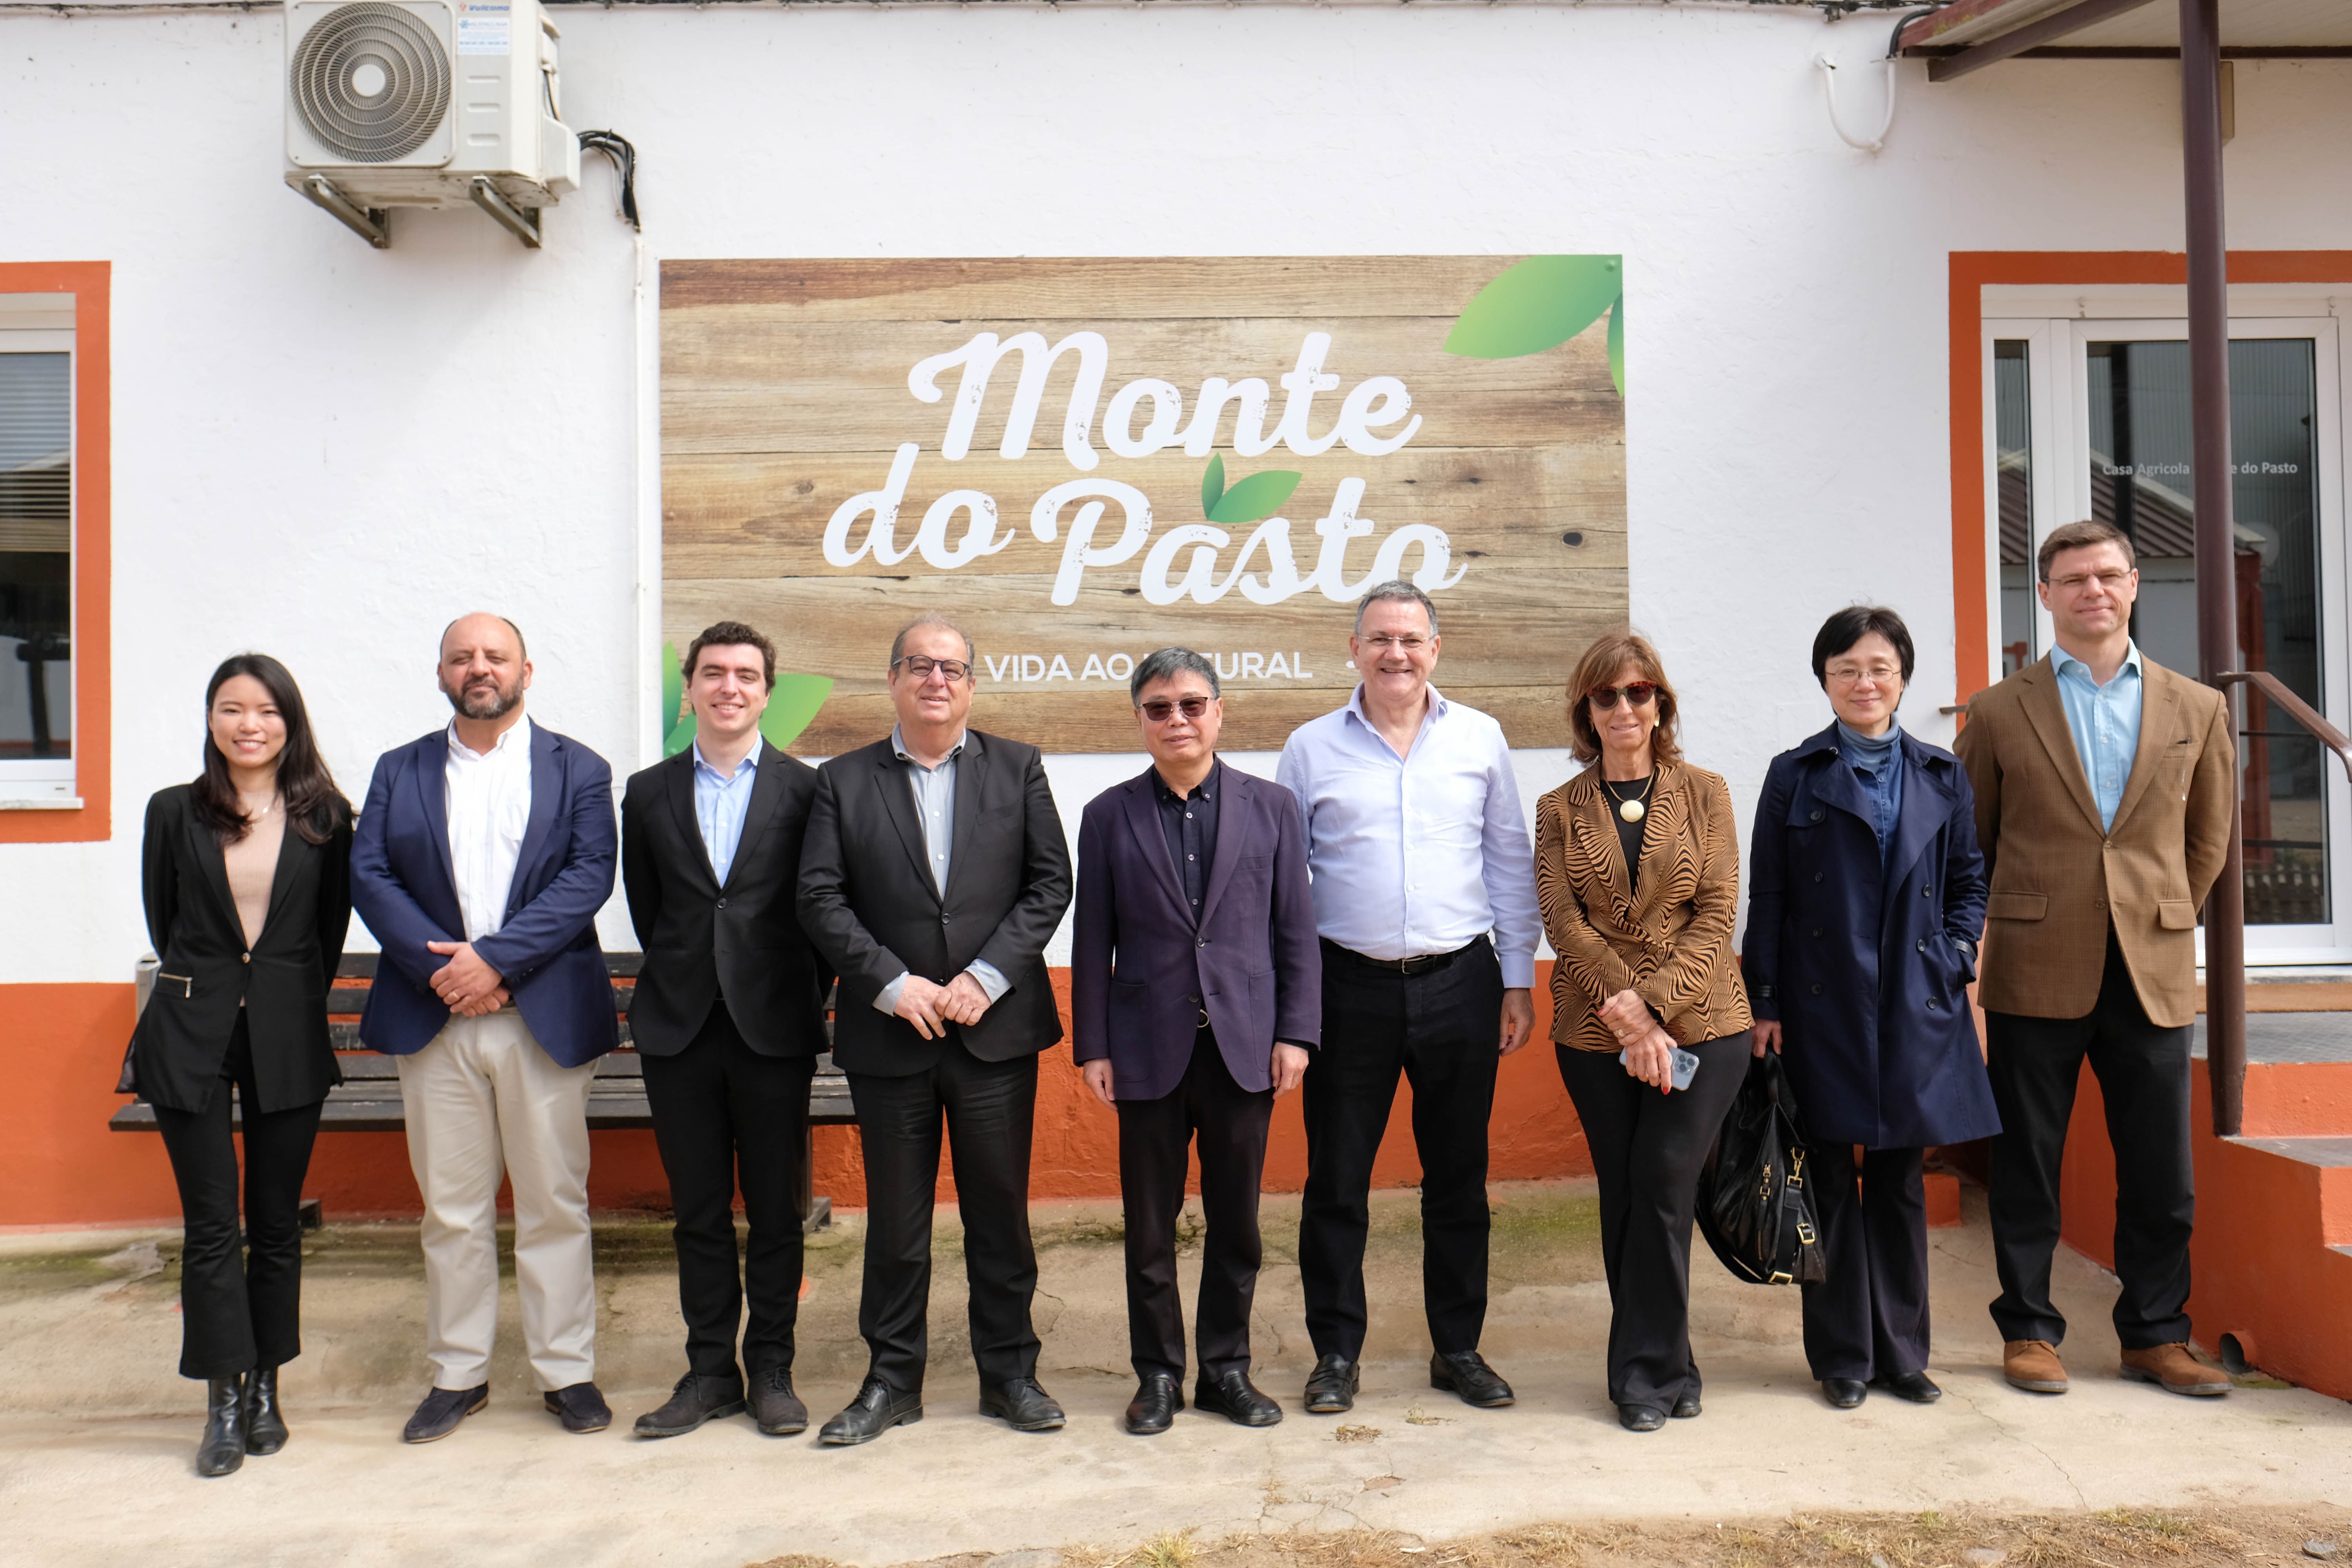 CESL Asia's Monte do Pasto hosts Portuguese Minister of Territorial Cohesion, Chinese Ambassador, and Secretary of State for Regional Development to discuss cooperation opportunities in the agricultural and energy sectors